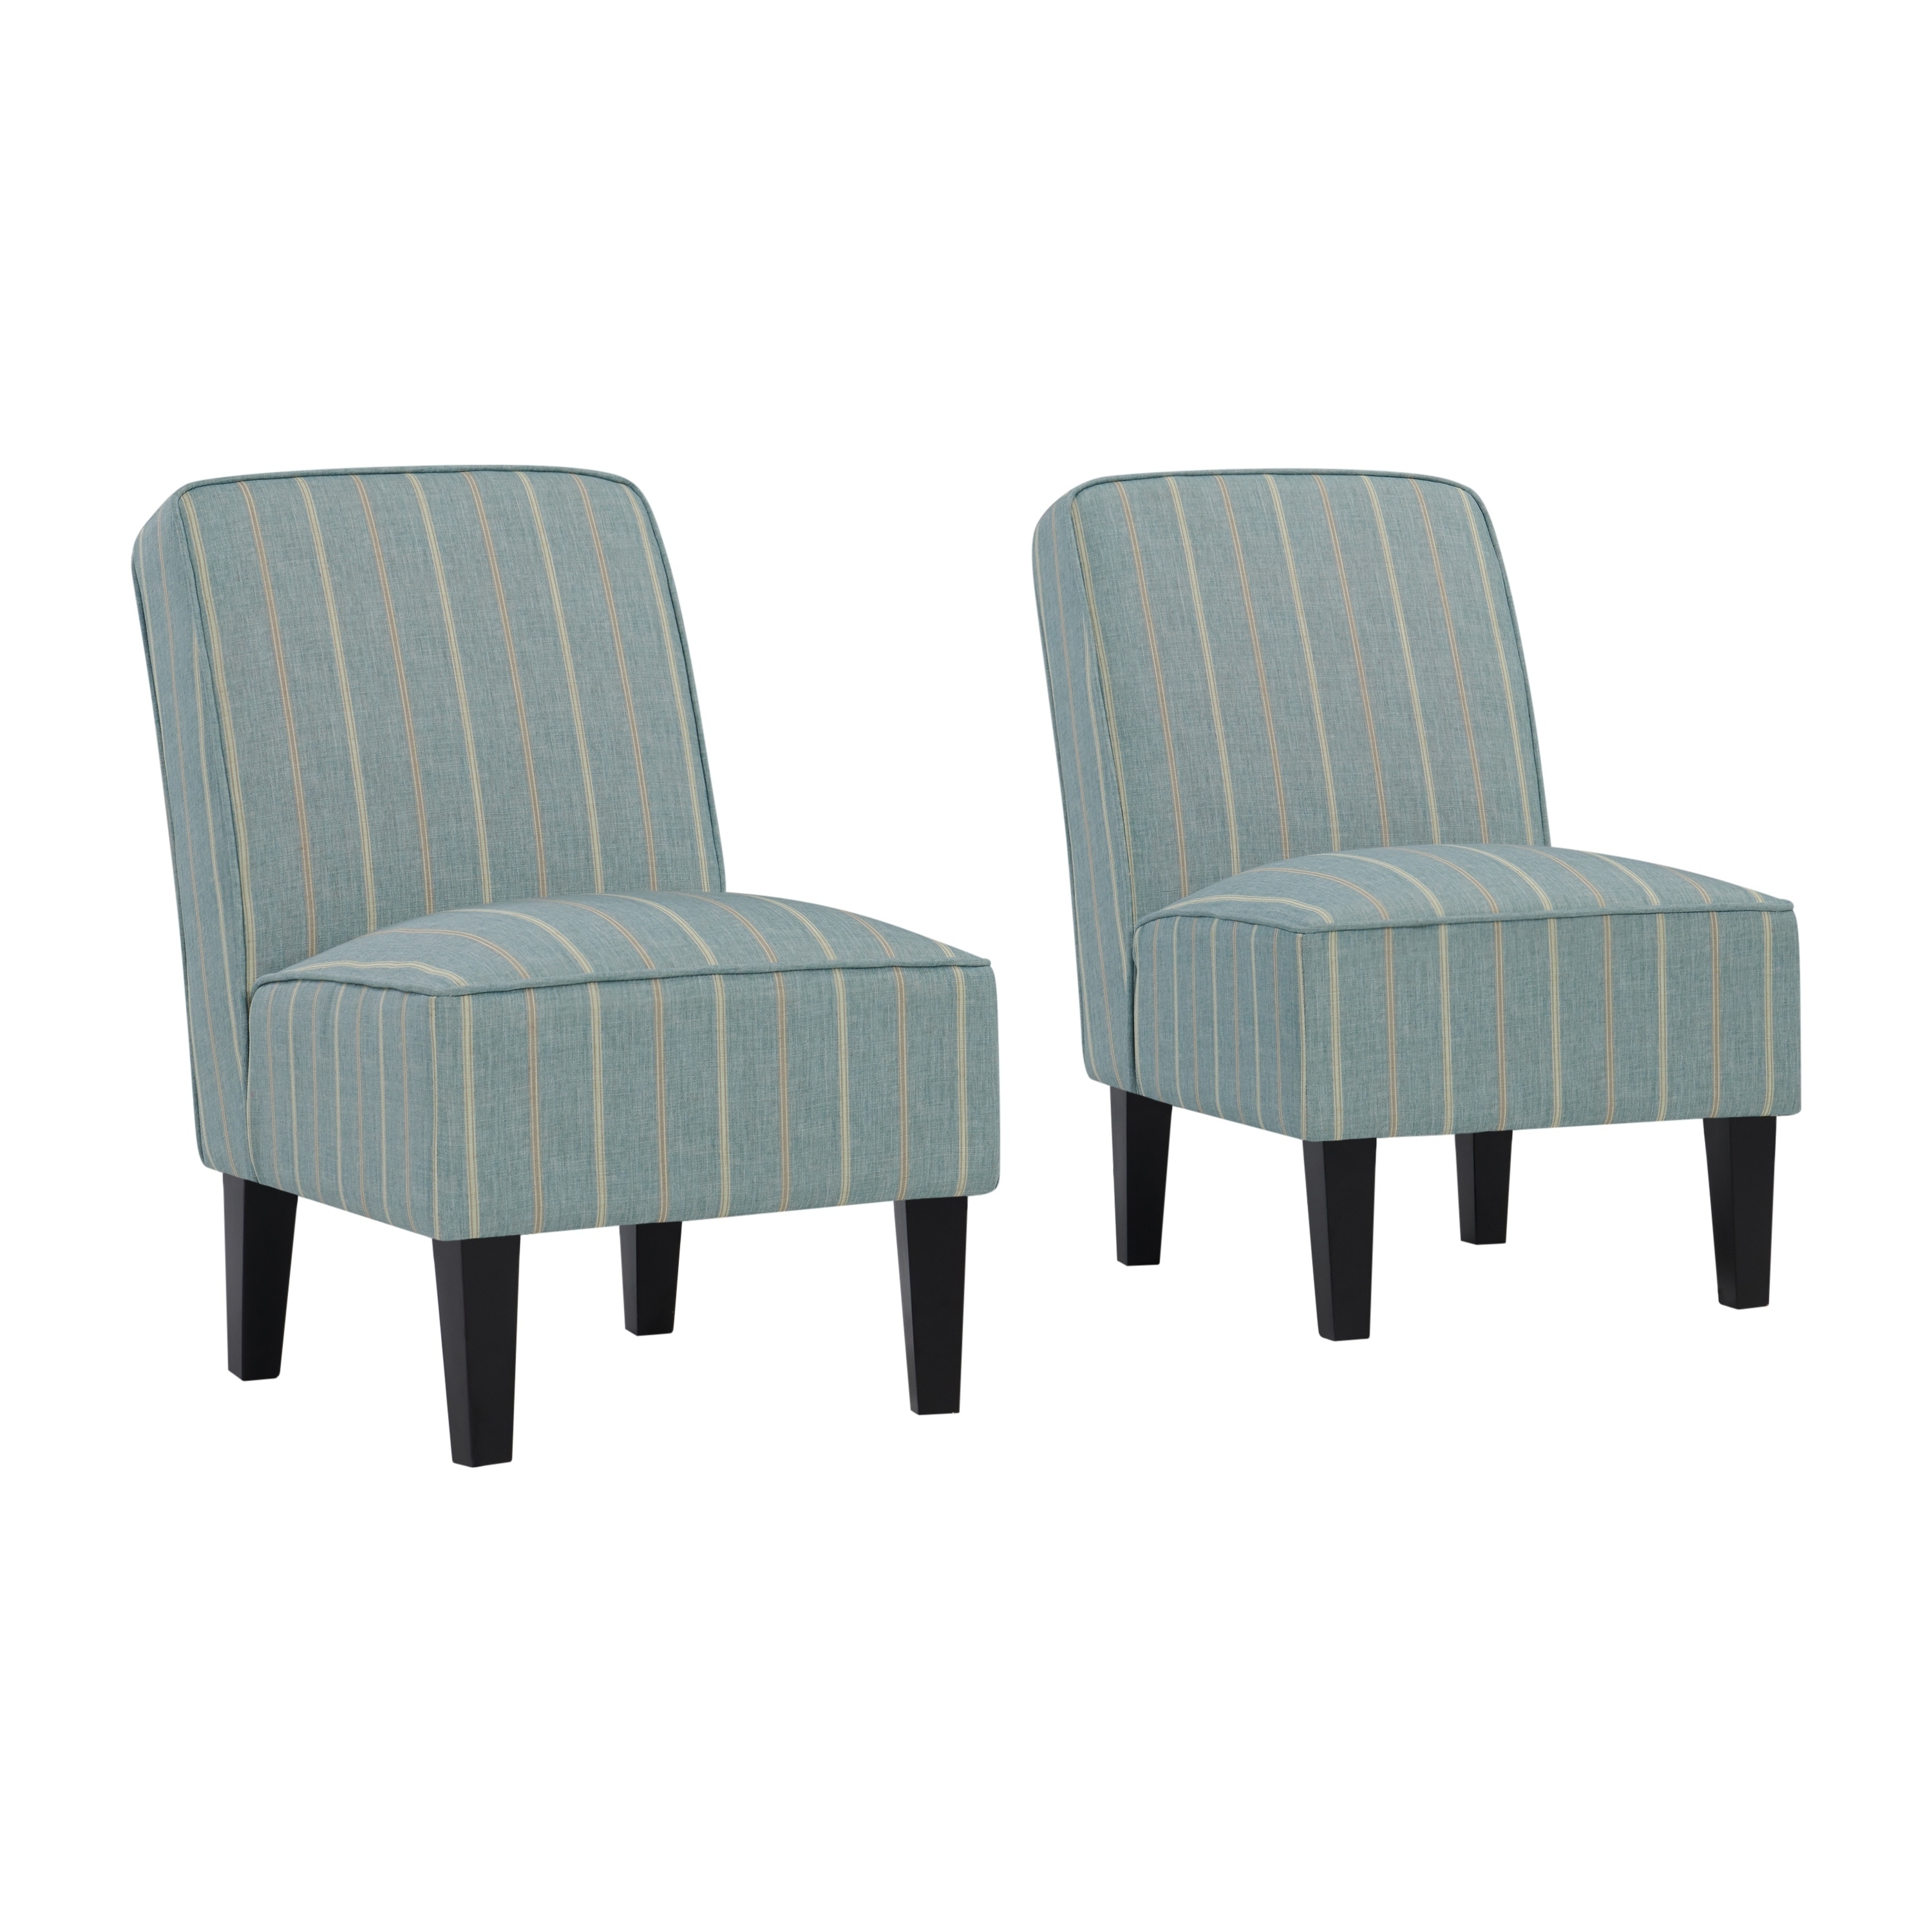 Copper Grove Couvin Armless Accent Chairs Set Of 2 Turquoise And Tan Stripe